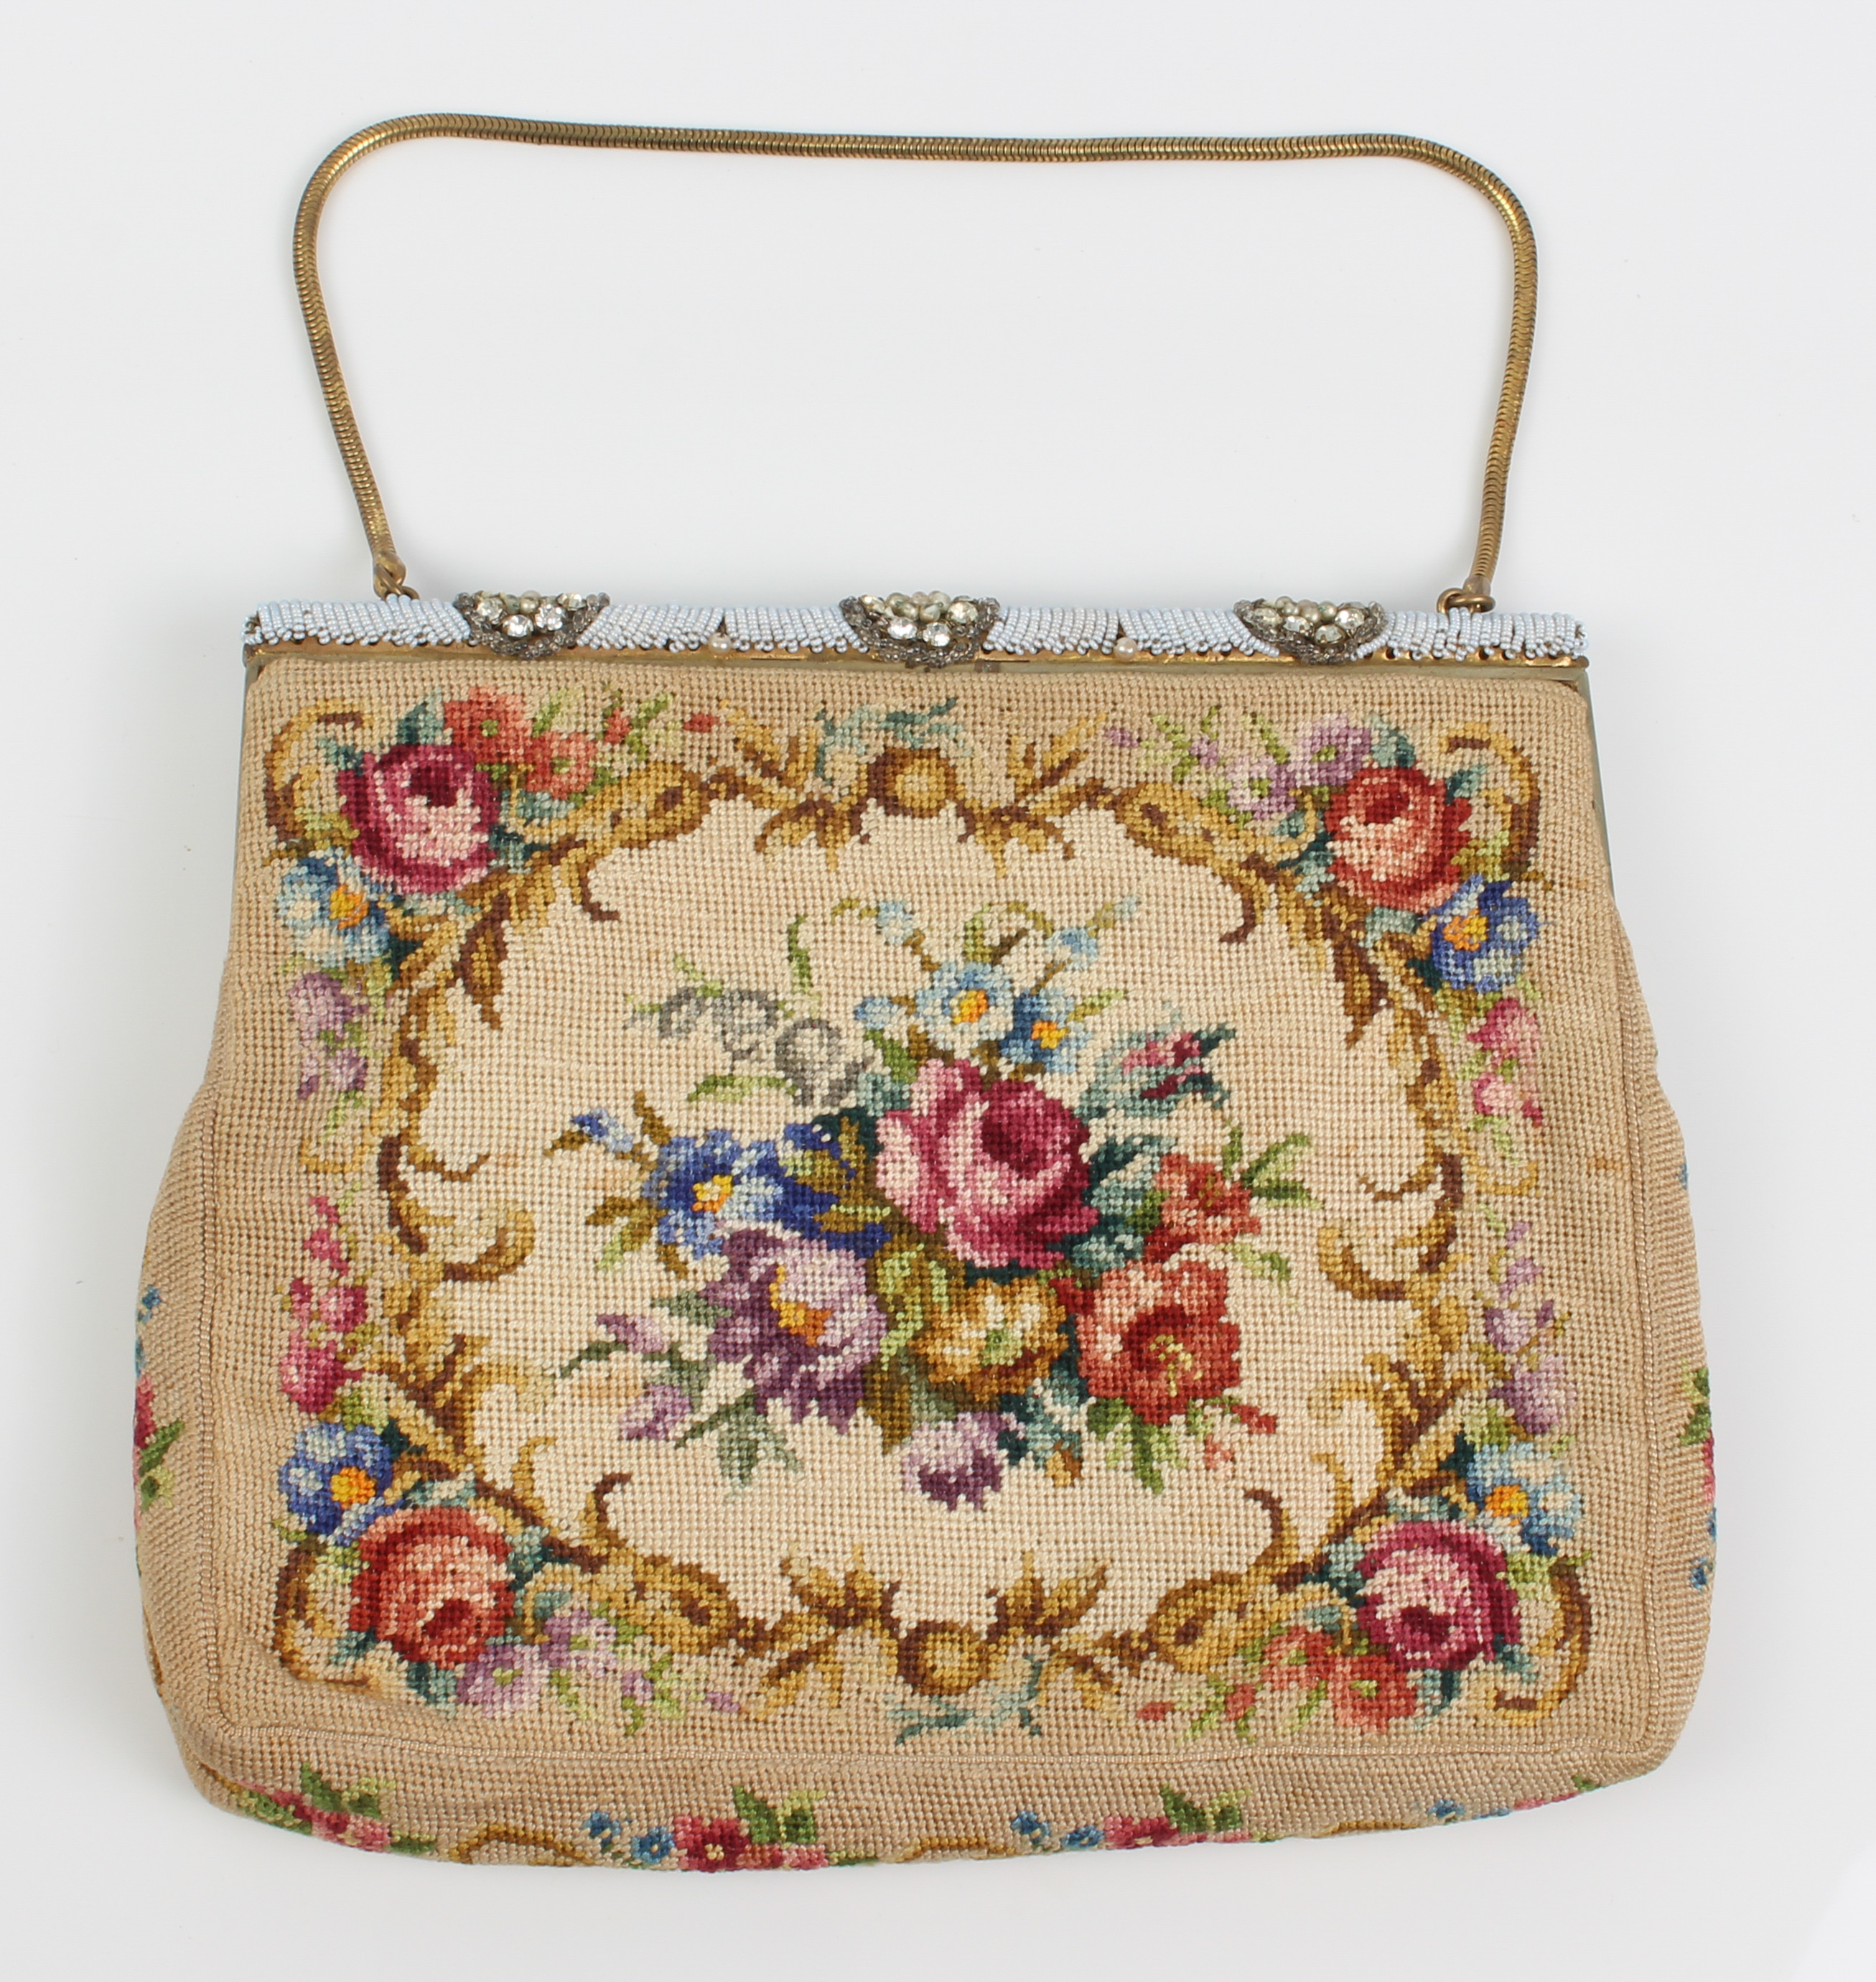 A vintage 1930s-50s gros point embroidered evening bag - containing a card by the original maker, '